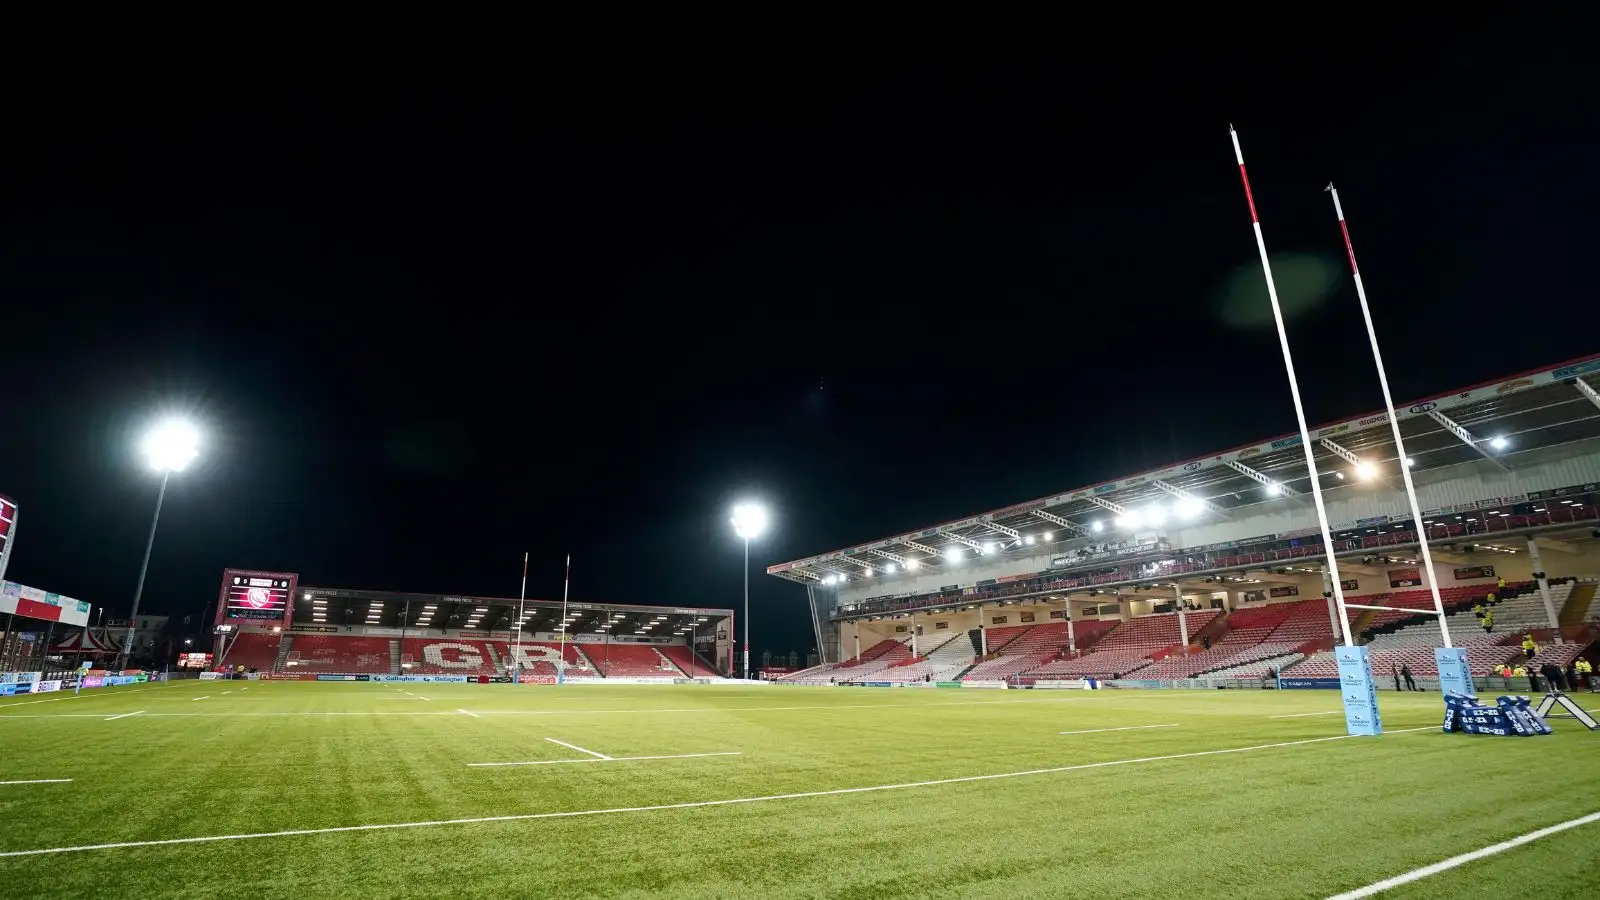 A general view of the pitch ahead of the Gallagher Premiership match at Kingsholm Stadium, Gloucester.